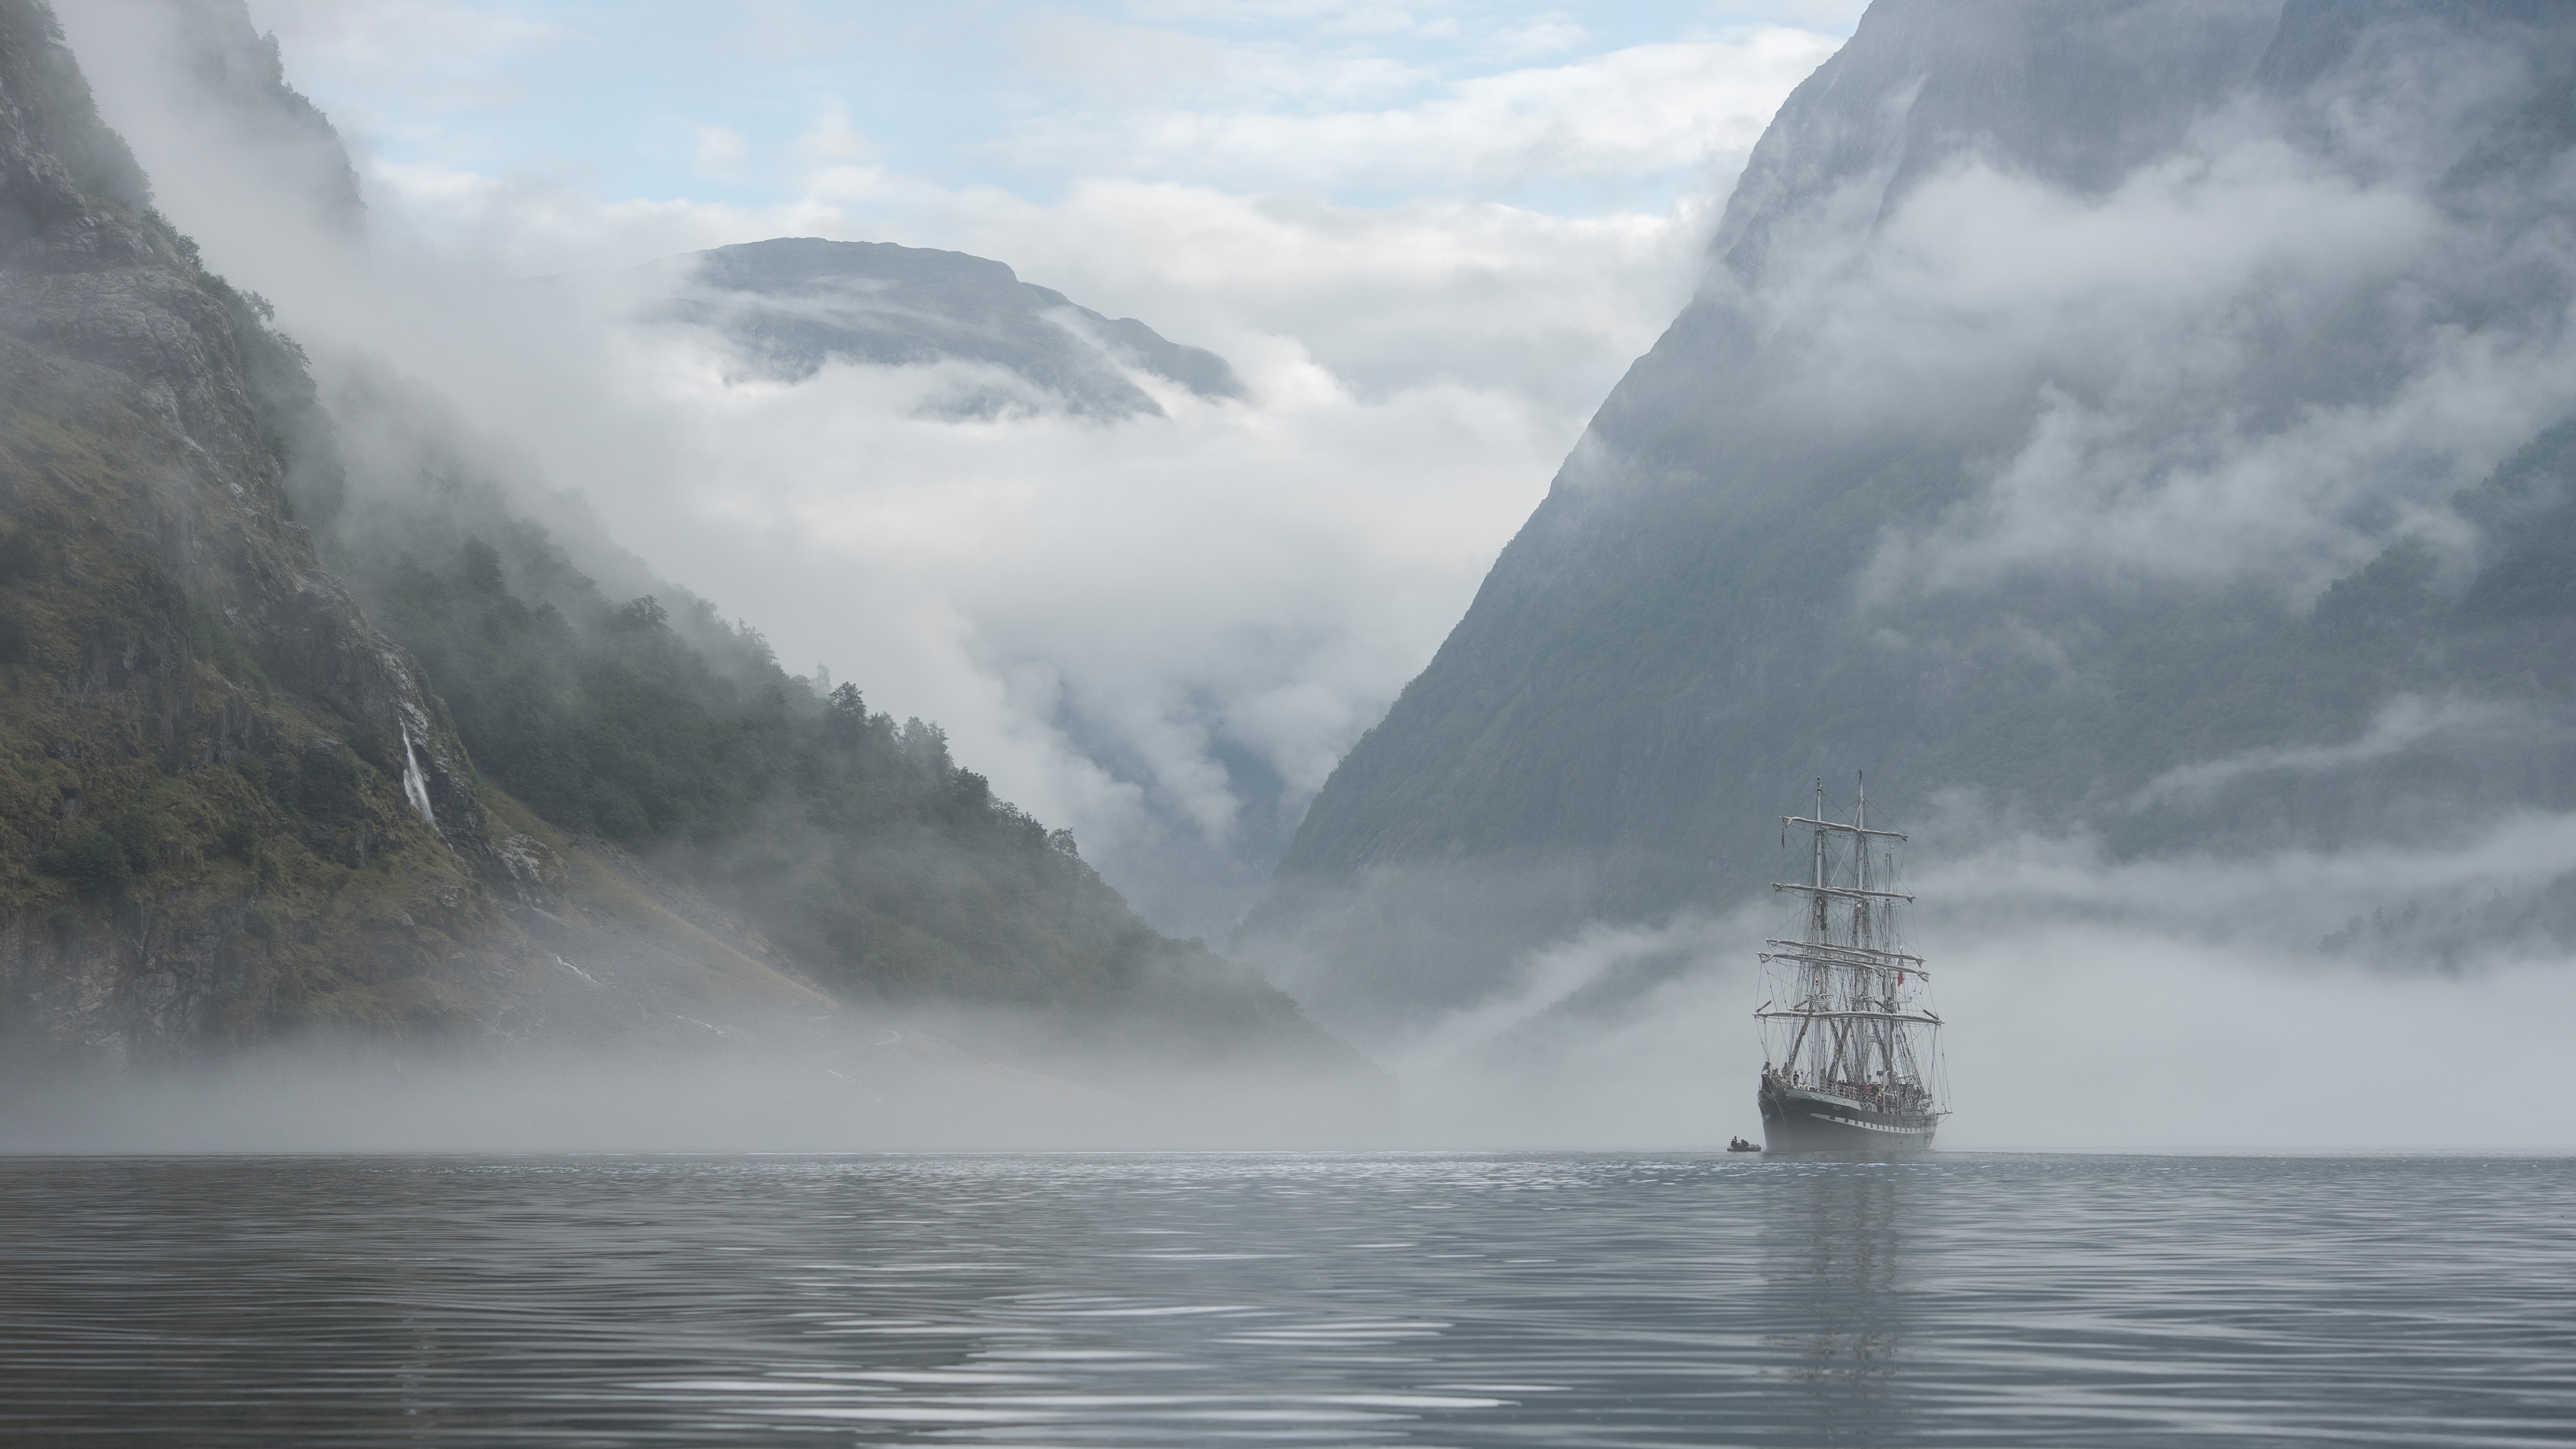 General 3840x2160 nature mountains ship Norway